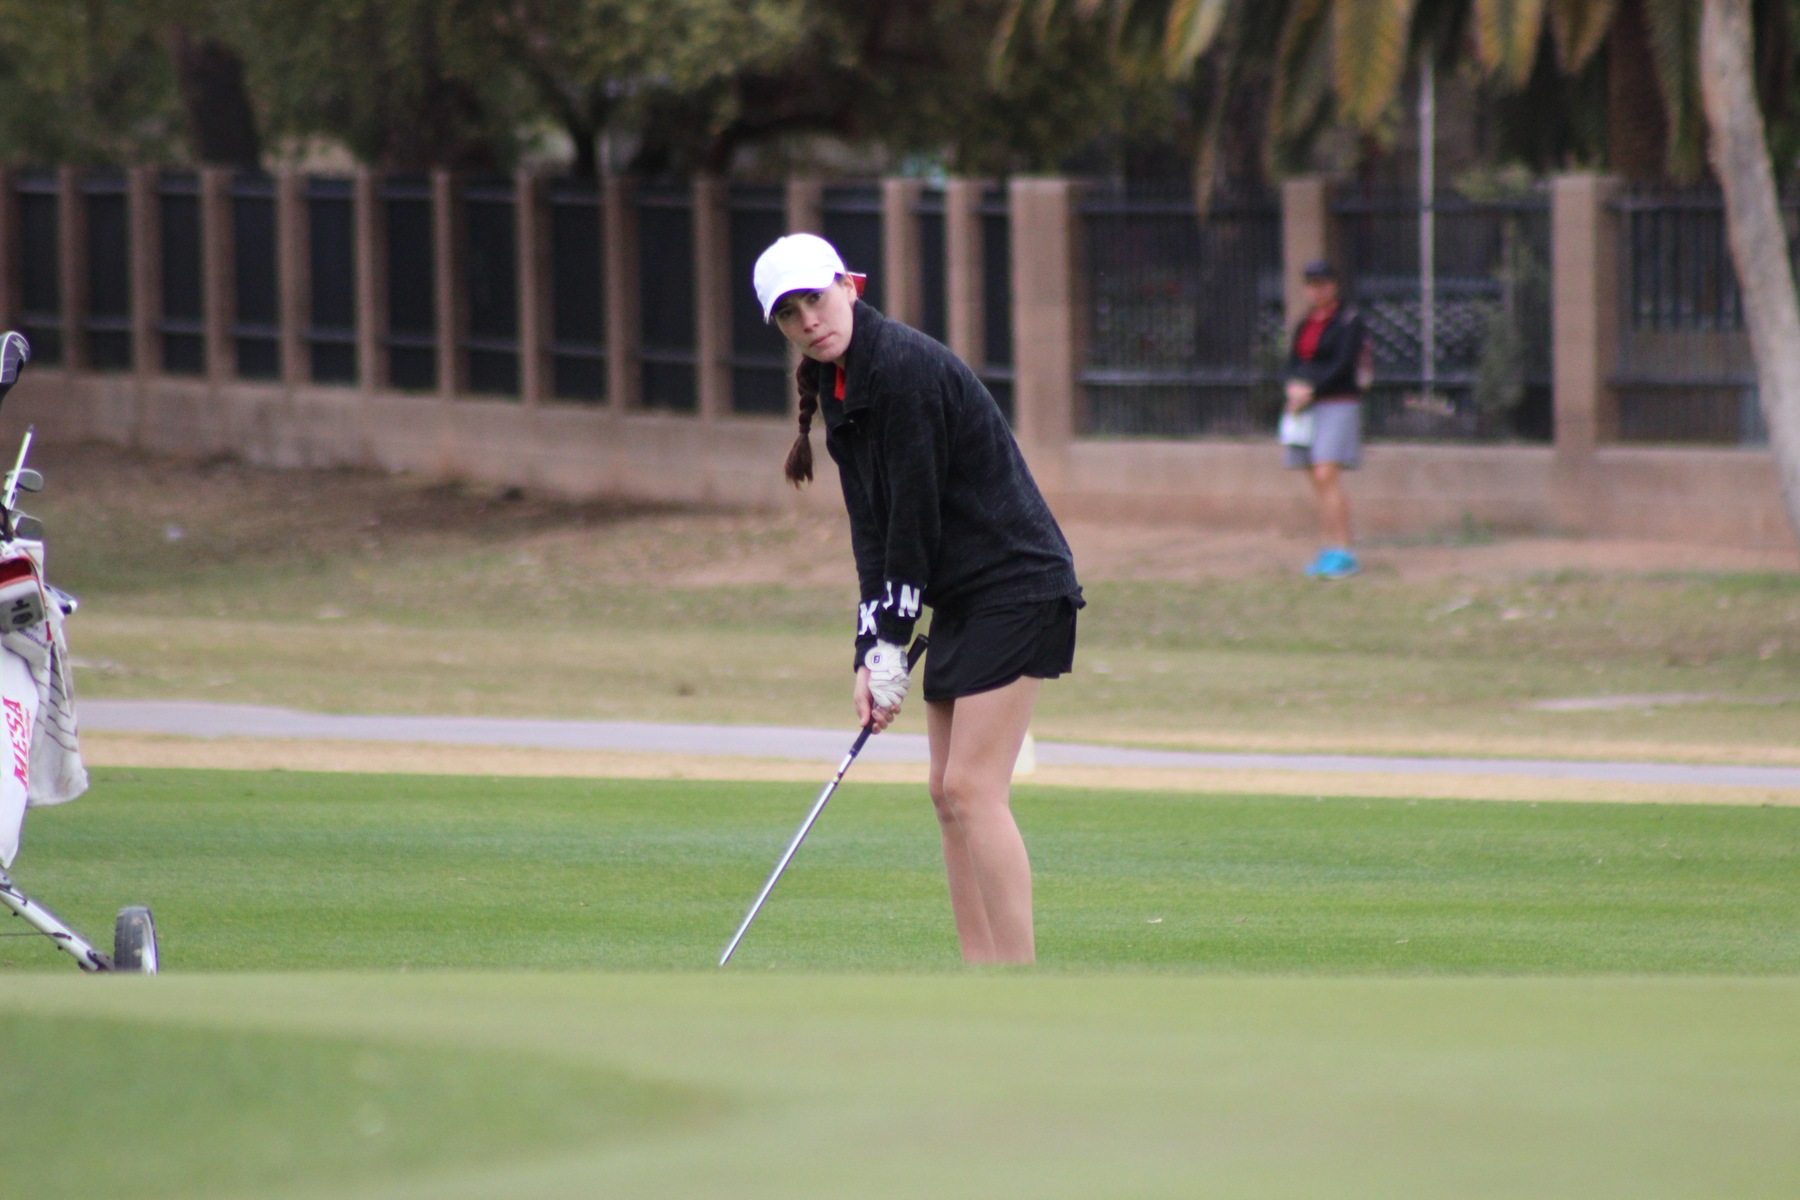 Megan Fusak helped Mesa to the first round lead with an 80